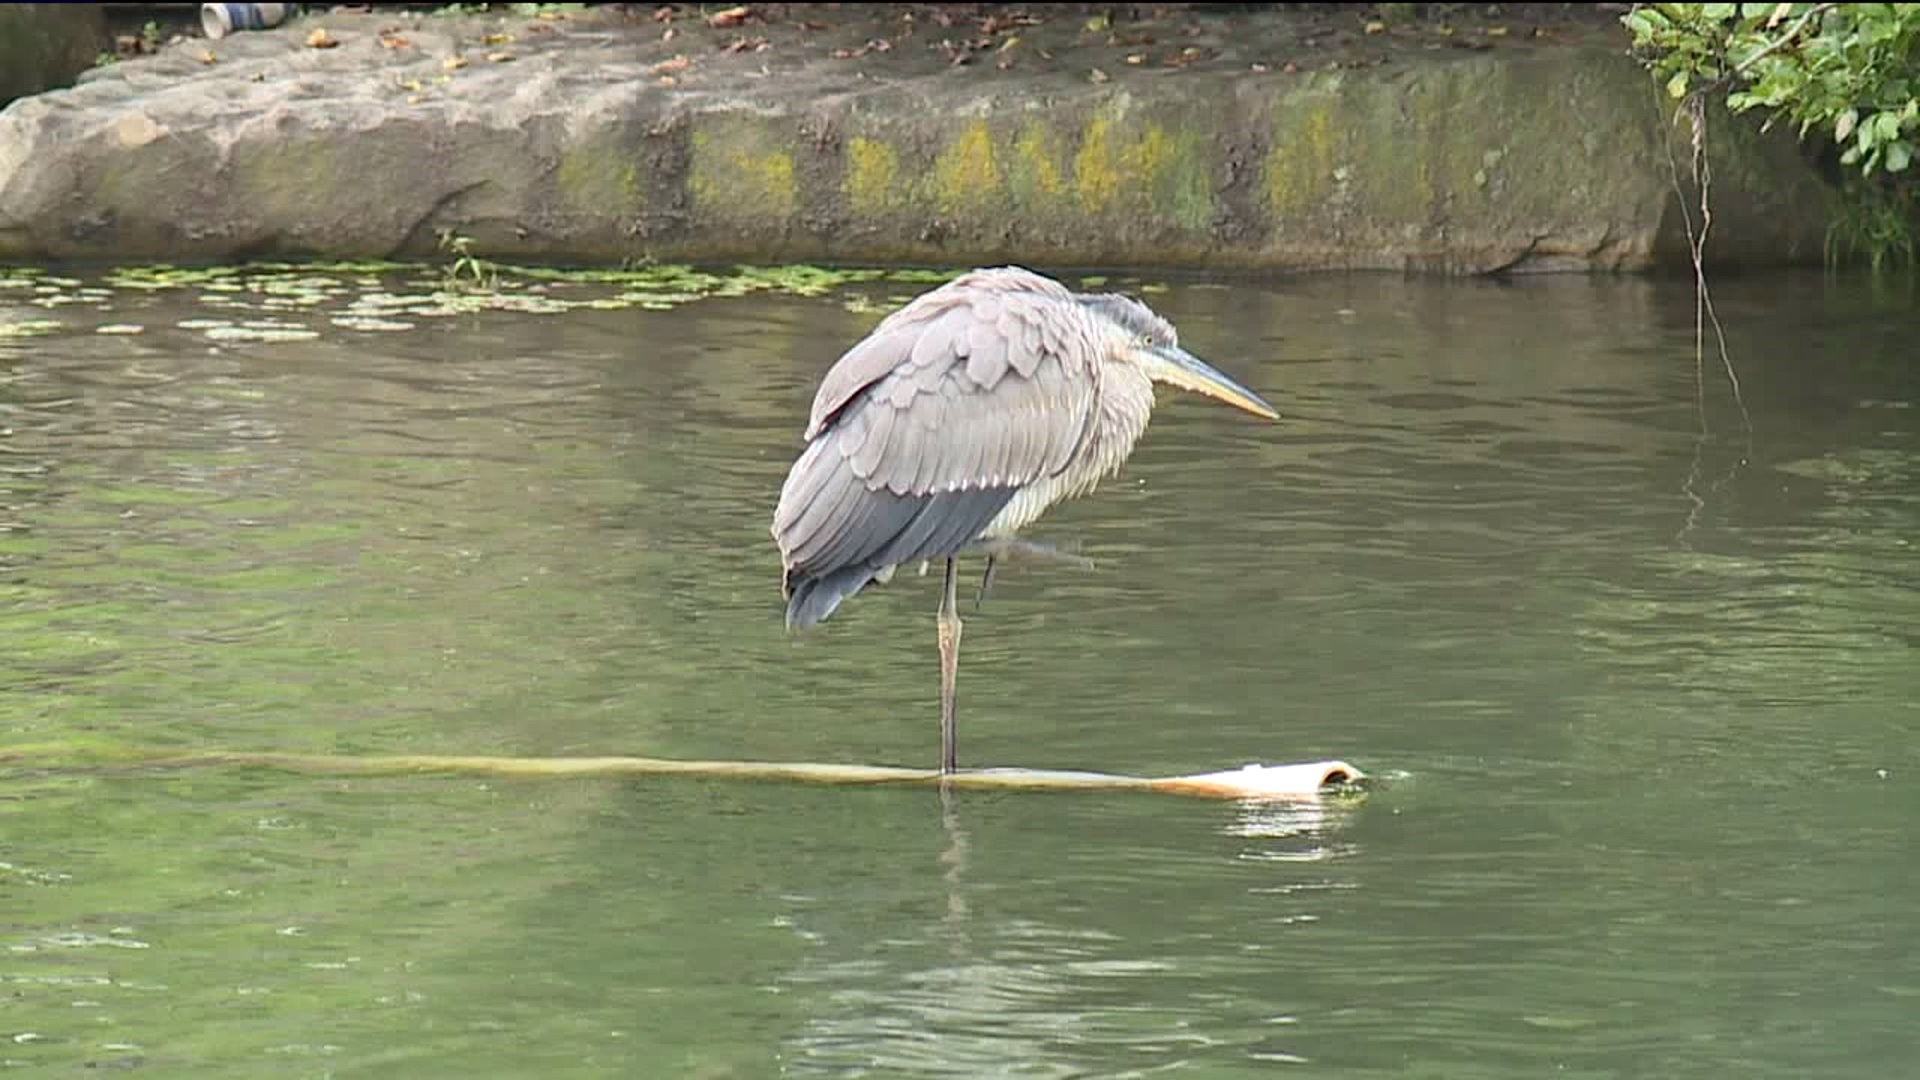 Heroes Rescue Tangled Heron at McDade Park